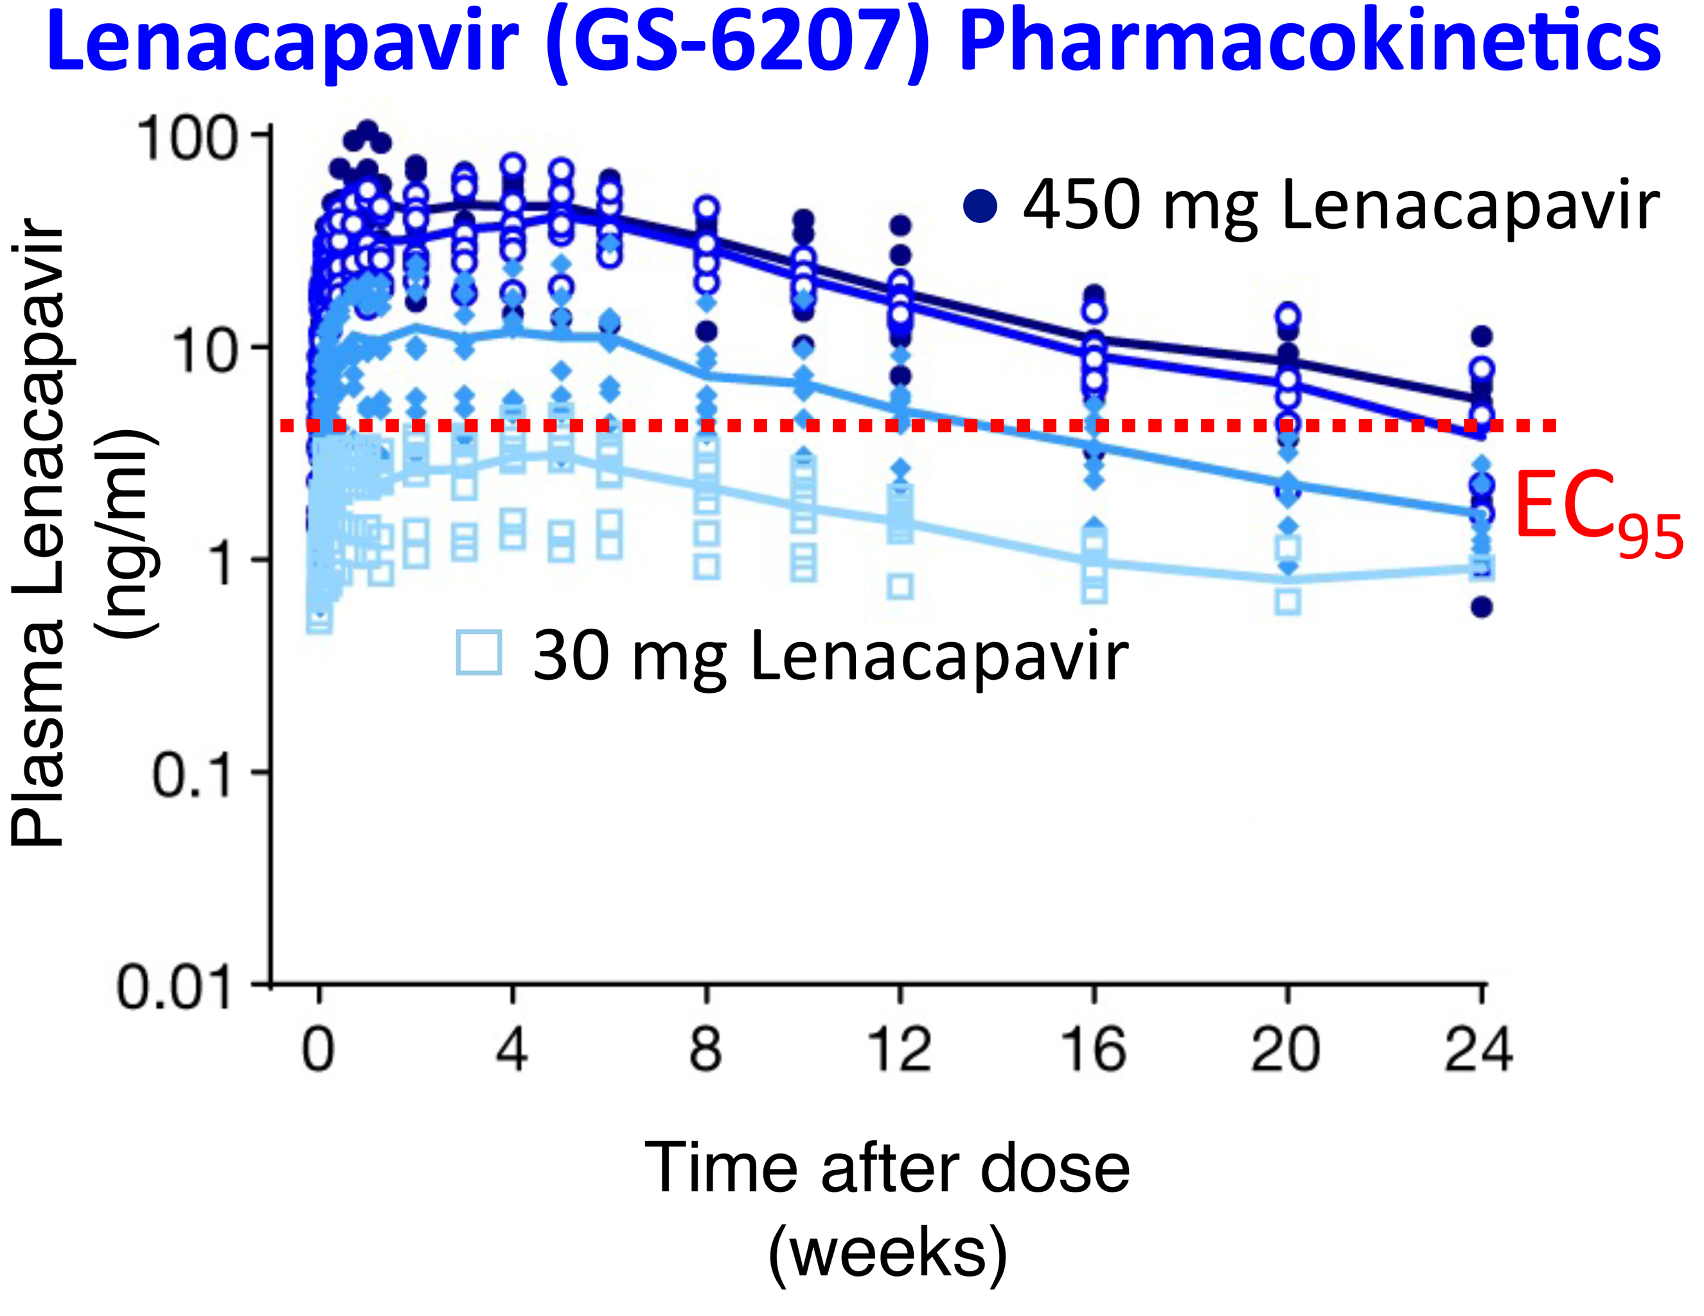 Persistence of Lenacapavir (GS-6207) in humans. The graph shows drug levels in people treated with single doses of different Lenacapavir levels. The dotted red line shows the drug level required to inhibit HIV replication by 95%. The highest levels of Lenacapavir maintain inhibitory levels for more than 24 weeks and are well tolerated.